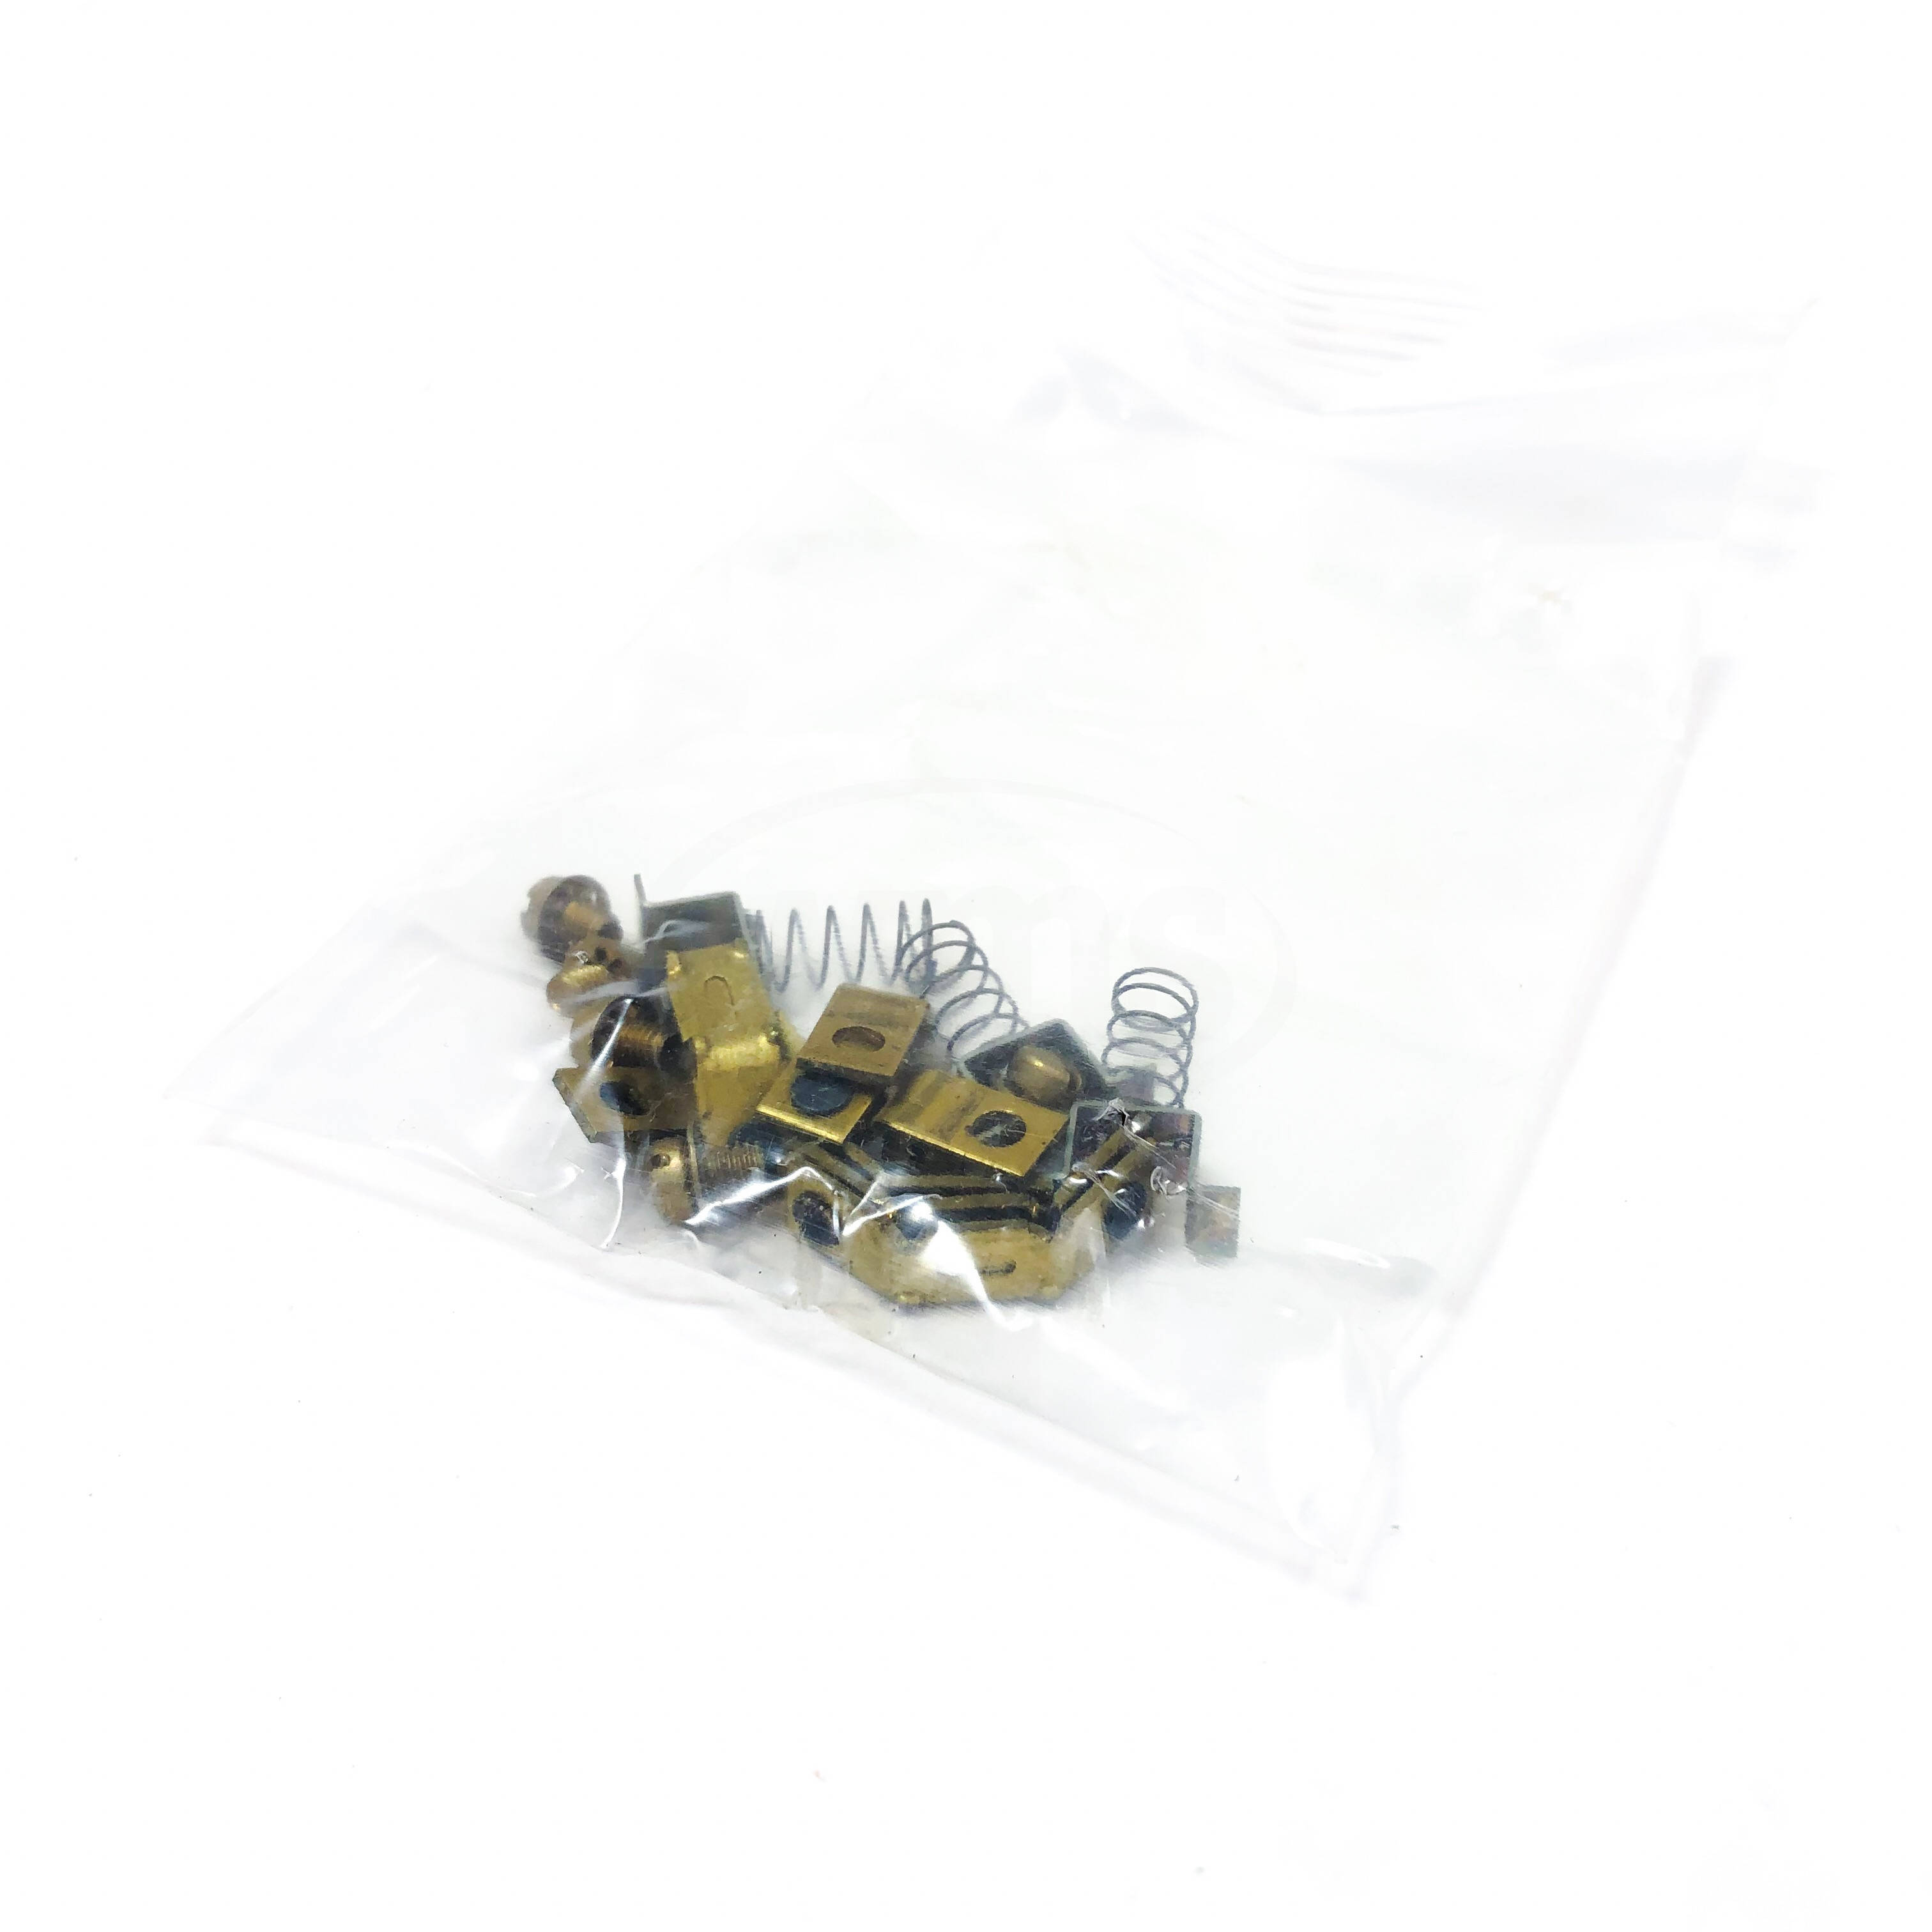 55-15231309 General Electric Contact Kit With Springs and Screws, For 4-Poles 3